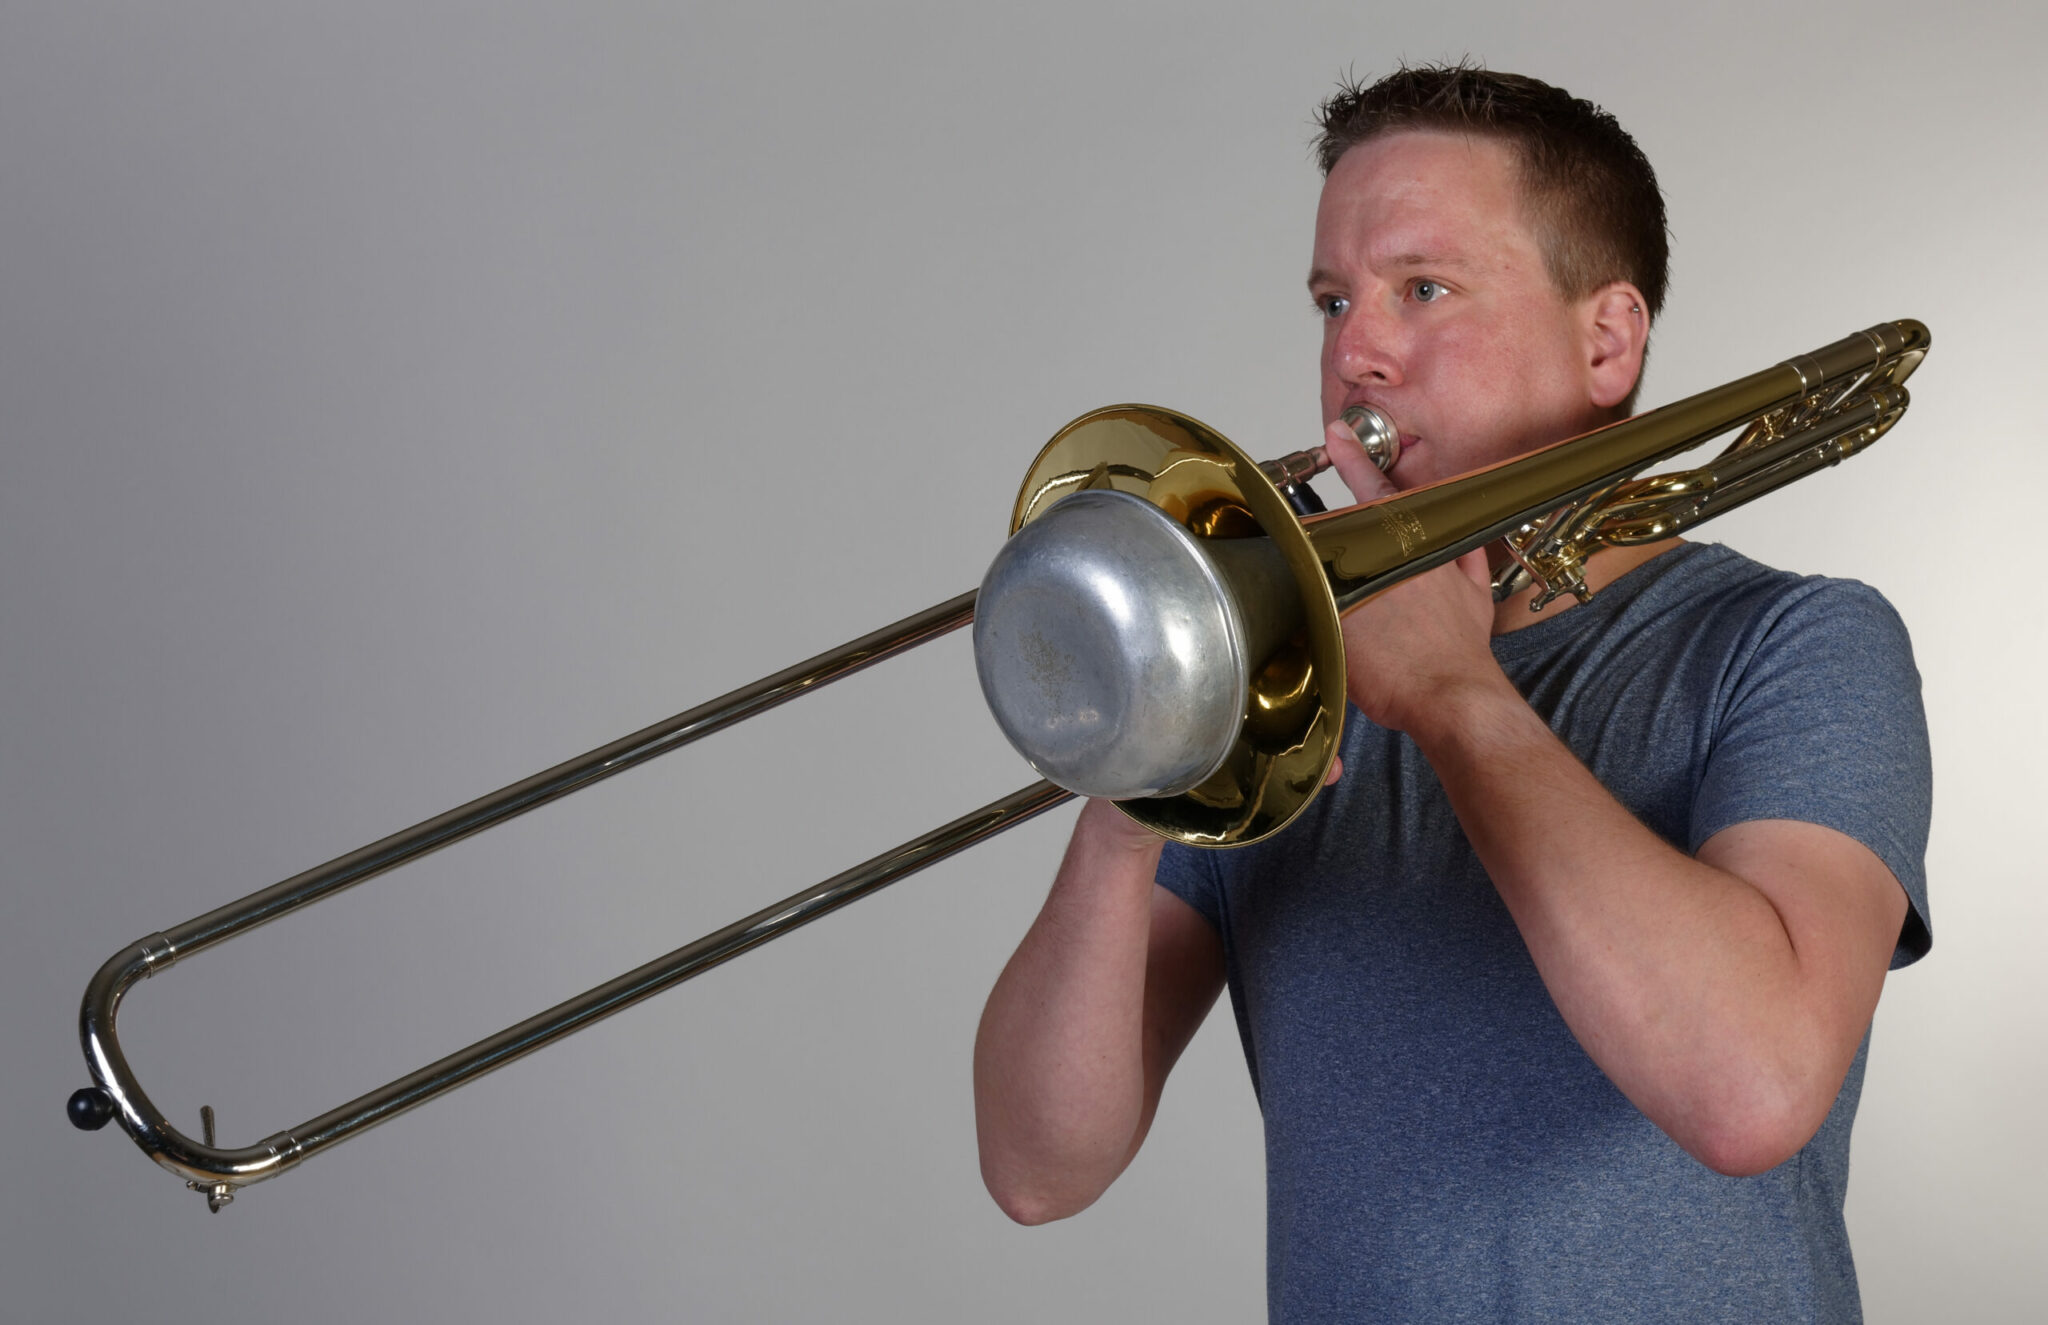 where do the words trombone trumpet and tuba come from and what does tuba mean in latin scaled